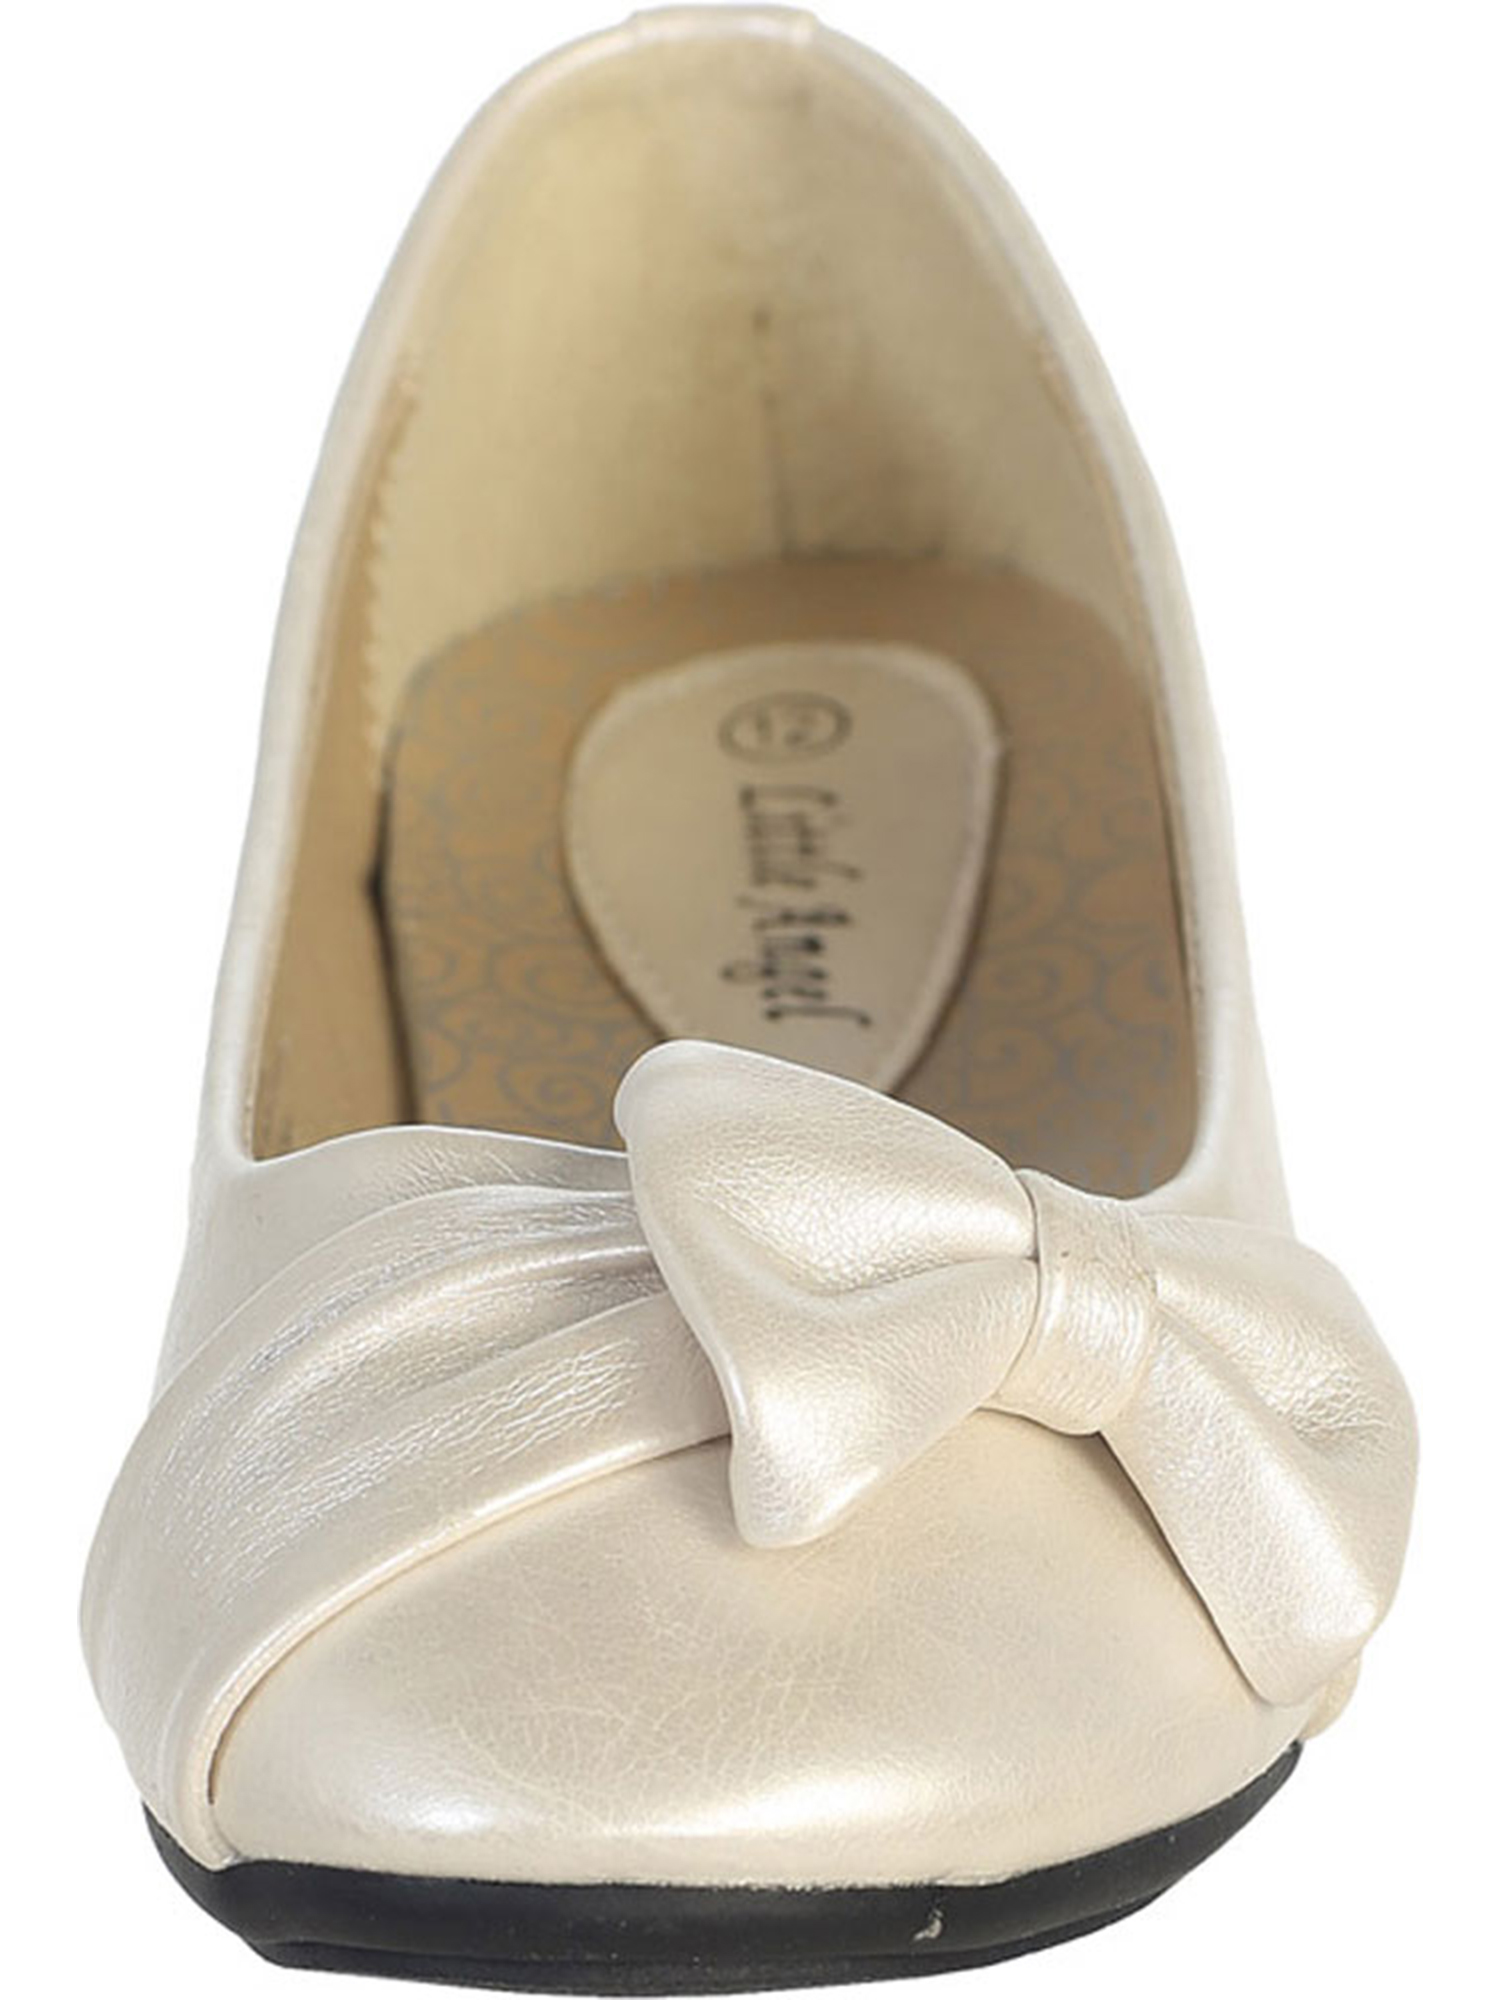 Ivory Pearl Girl's Flat Shoes with Side Bow Girl 9